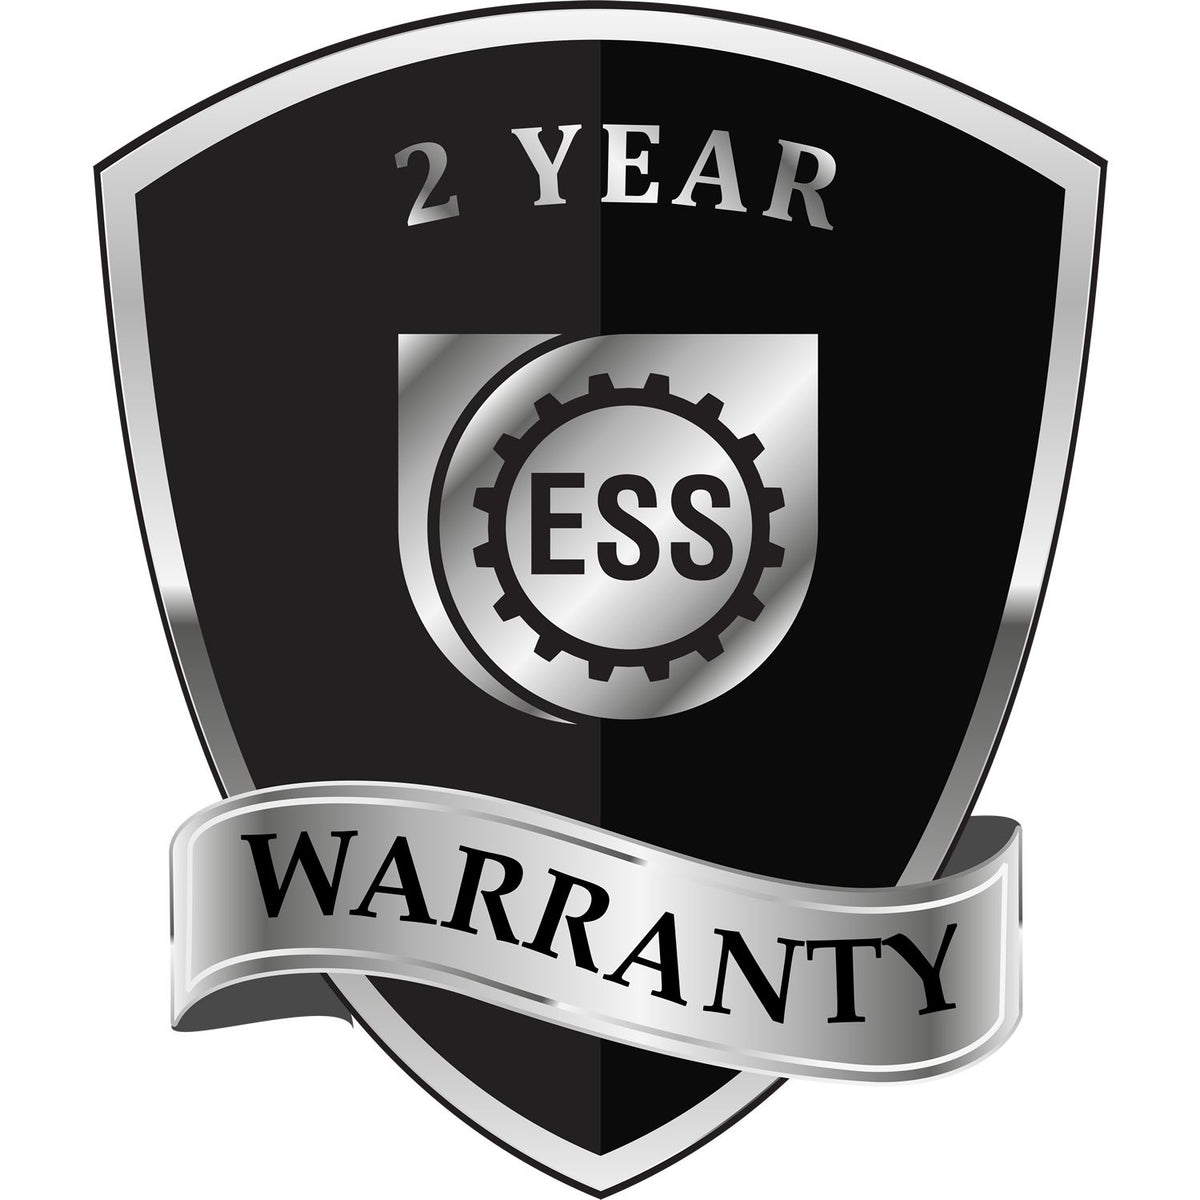 A badge or emblem showing a warranty icon for the Soft New York Professional Engineer Seal